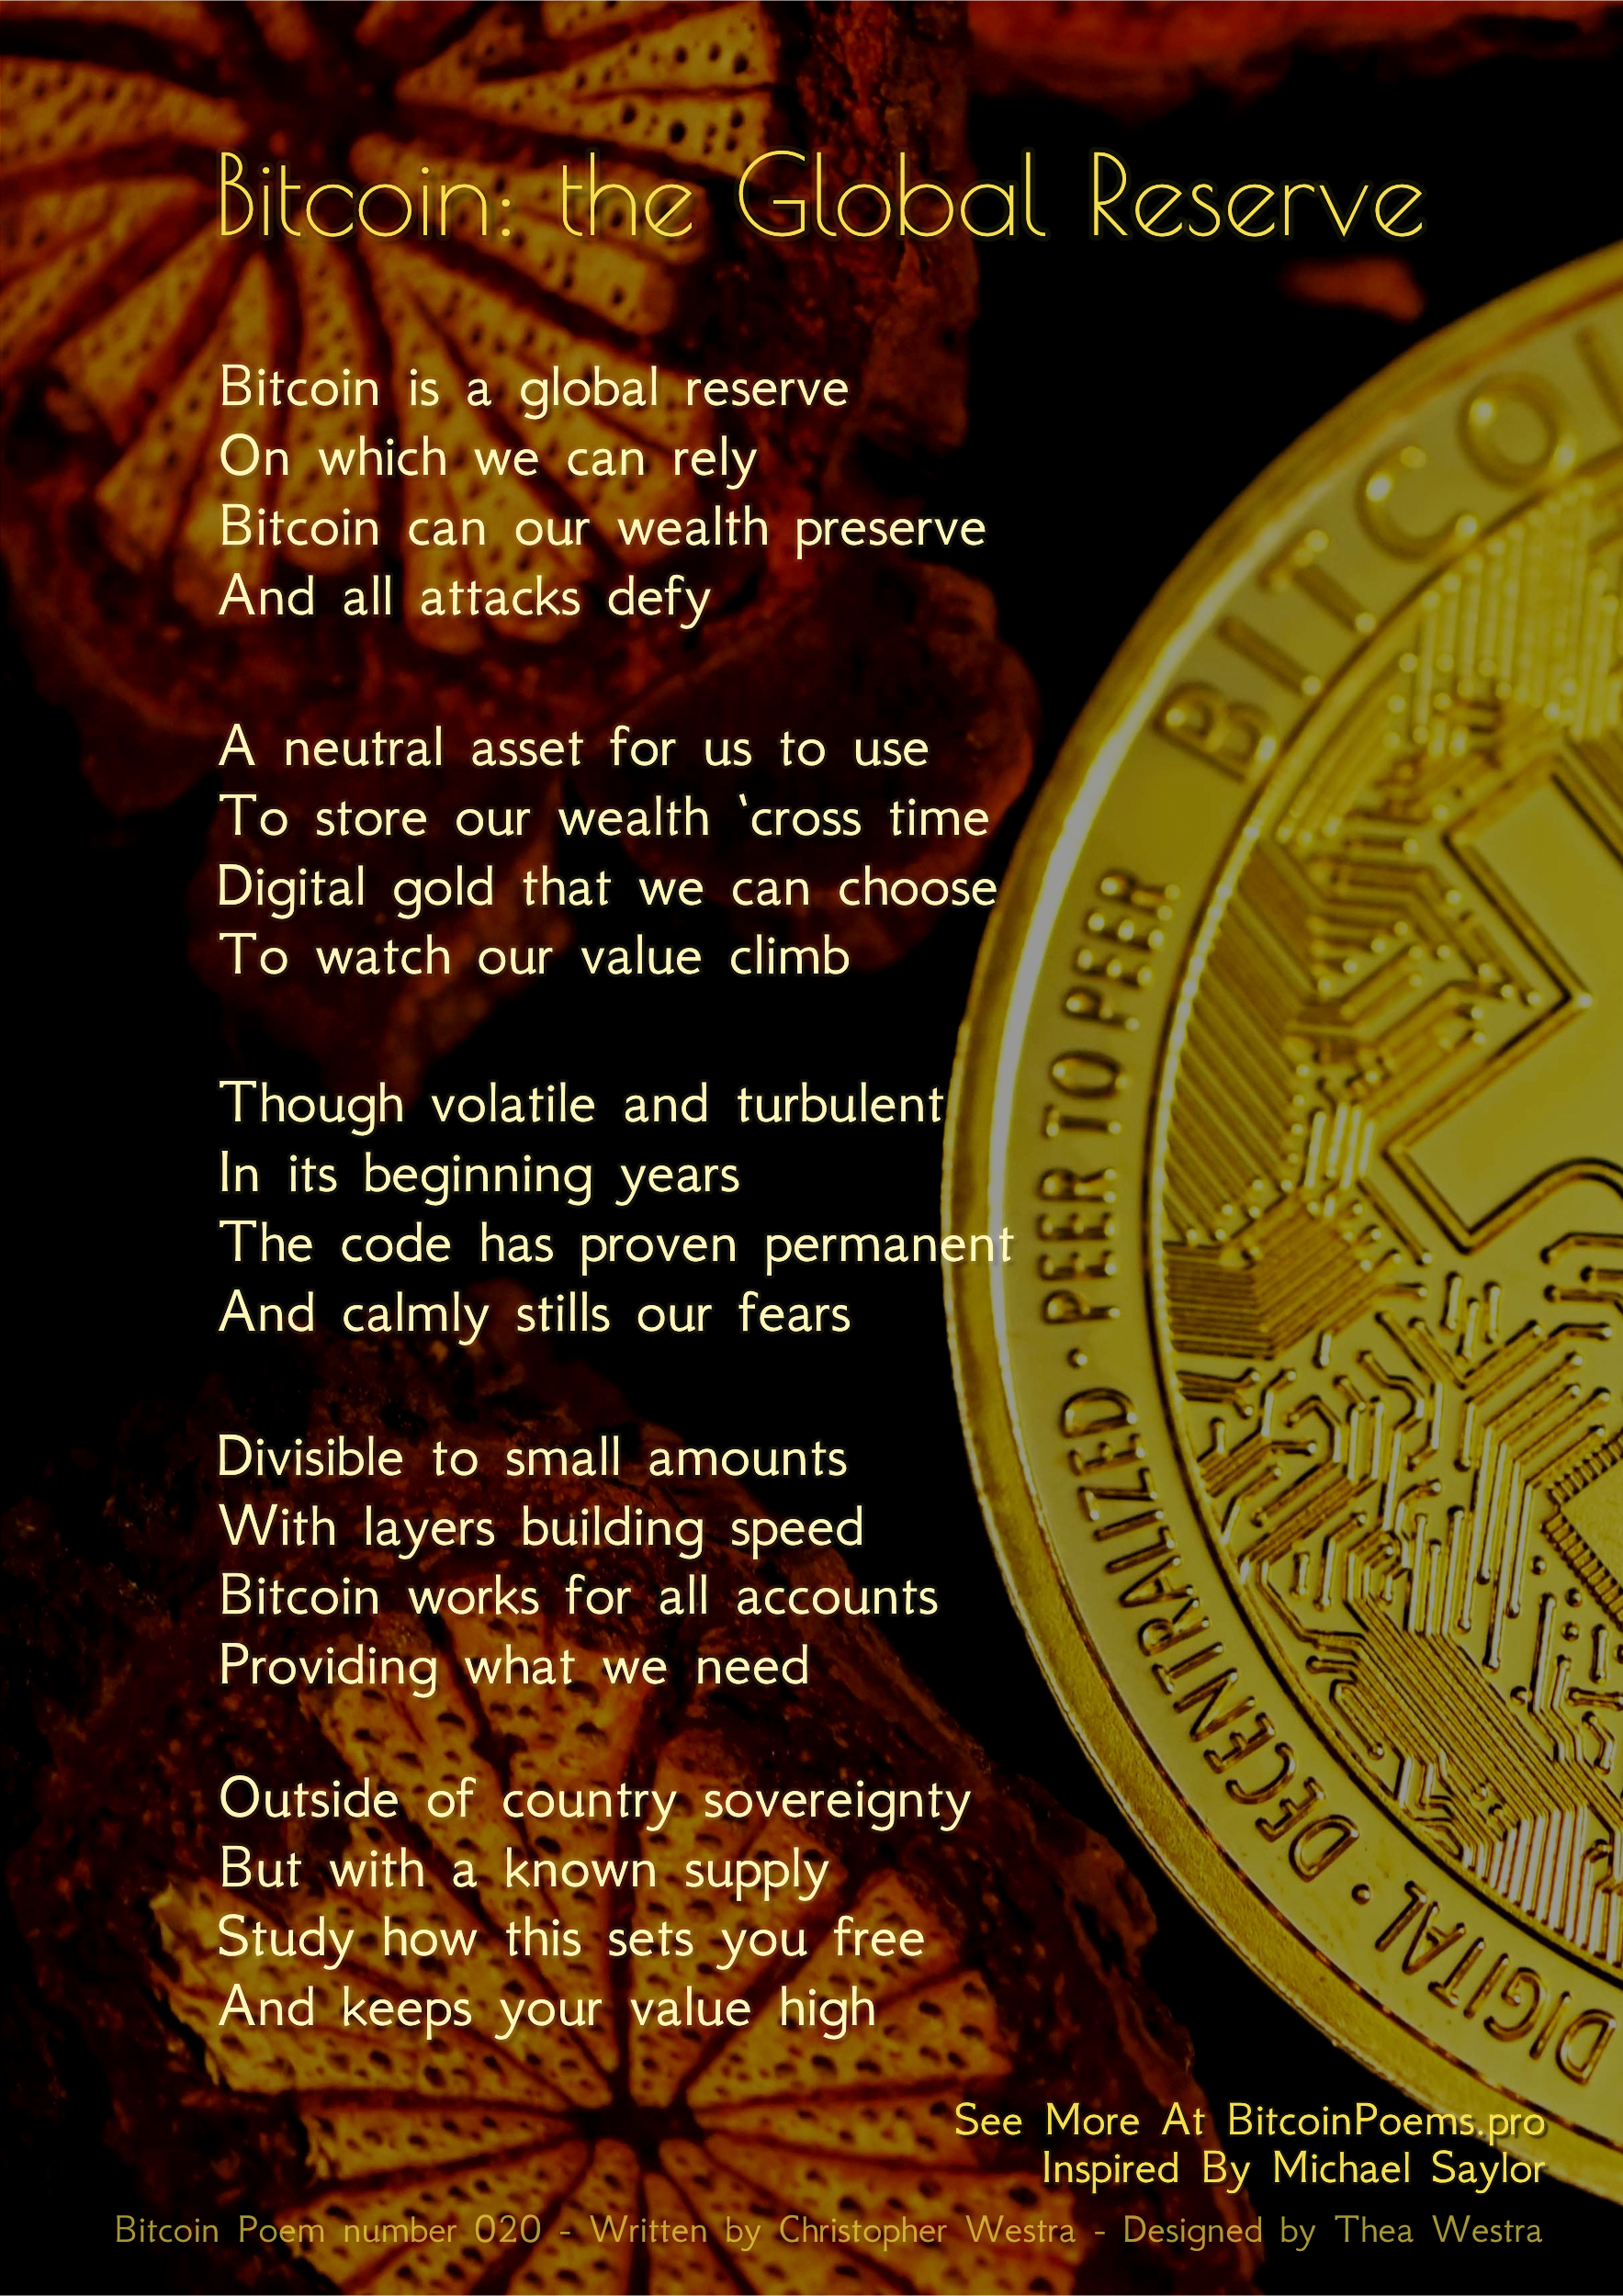 Bitcoin: The Global Reserve - Bitcoin Poem 020 by Christopher Westra